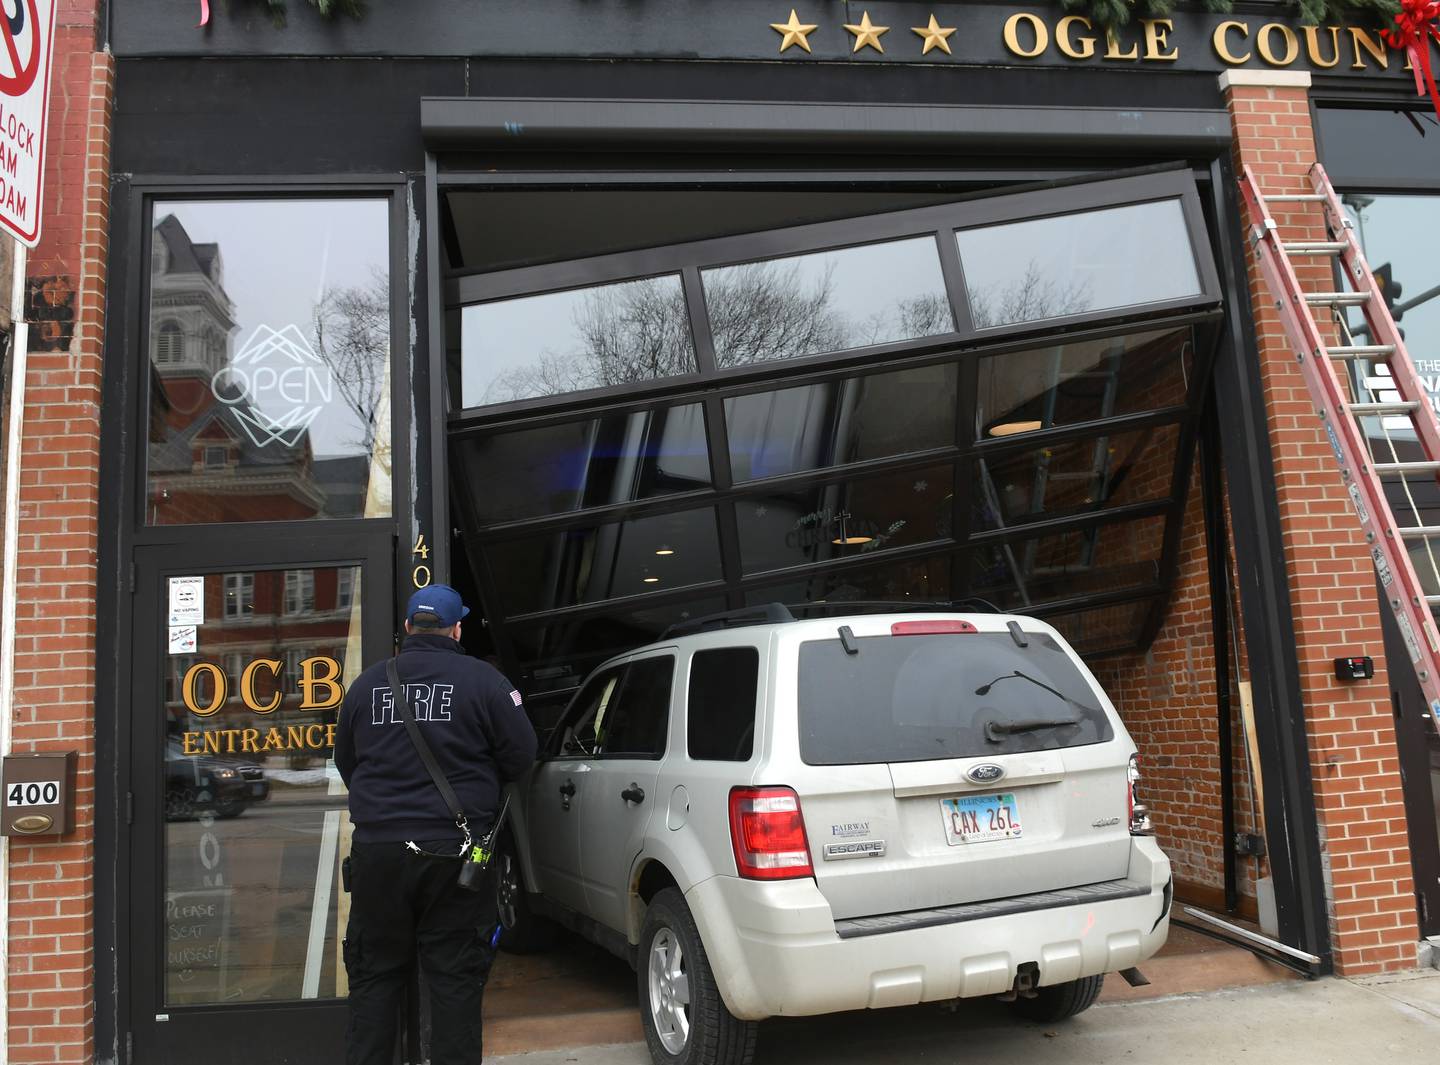 A vehicle crashed into the Ogle County Brewery in downtown Oregon early Sunday afternoon after being struck by another vehicle at the intersection of Illinois 64 and Illinois 2. There were no injuries to either driver or patrons inside the business.